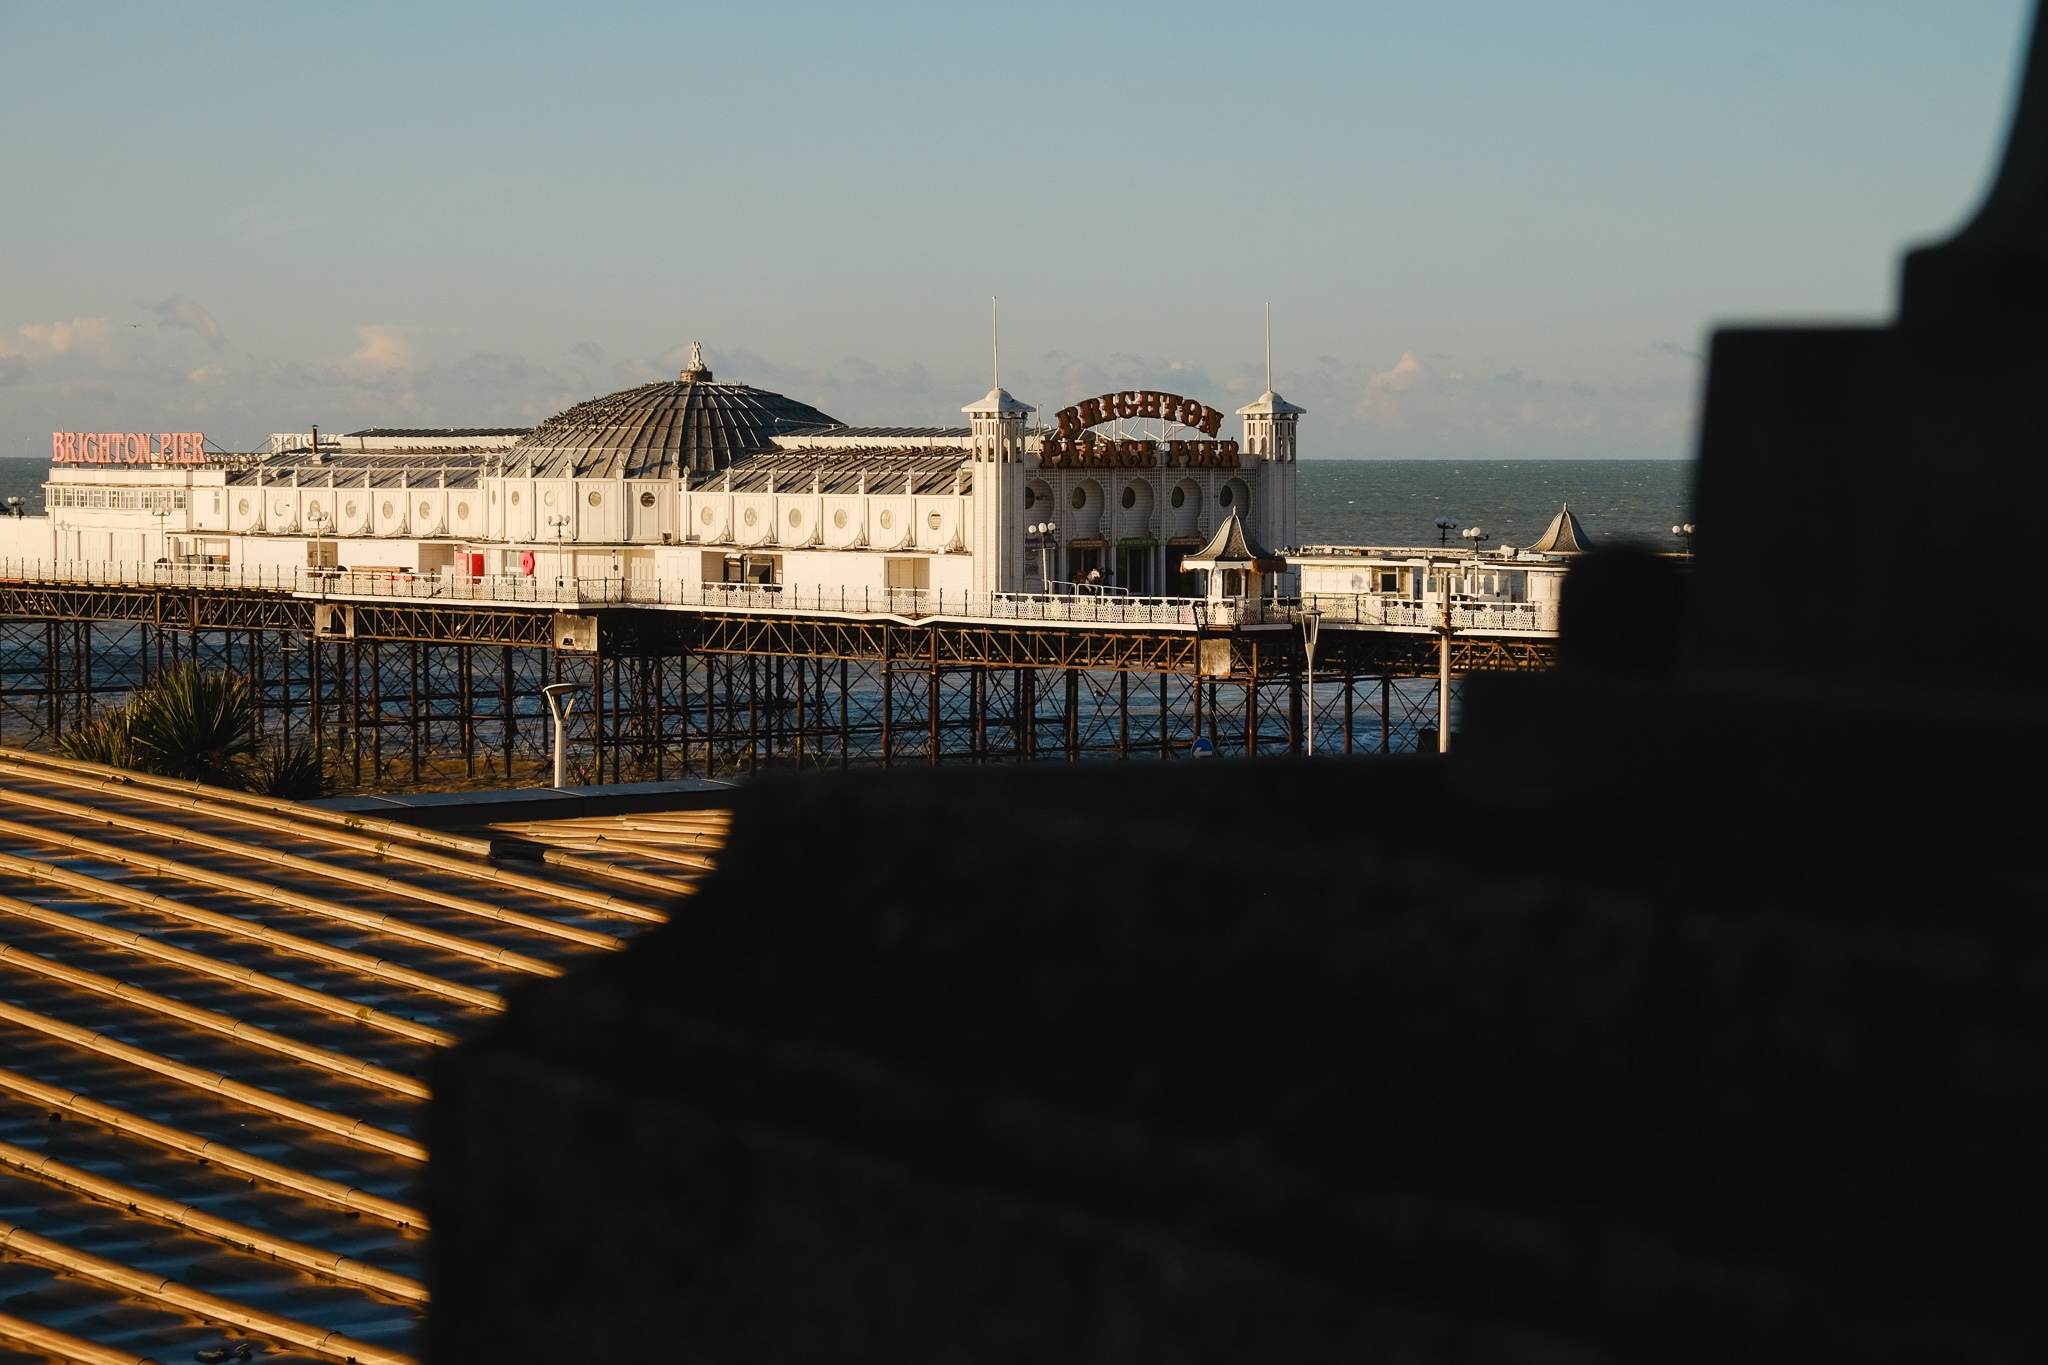 Brighton pier from the road peaks out from a roof in the foreground, the early morning sun casting a bright warm light on the structure